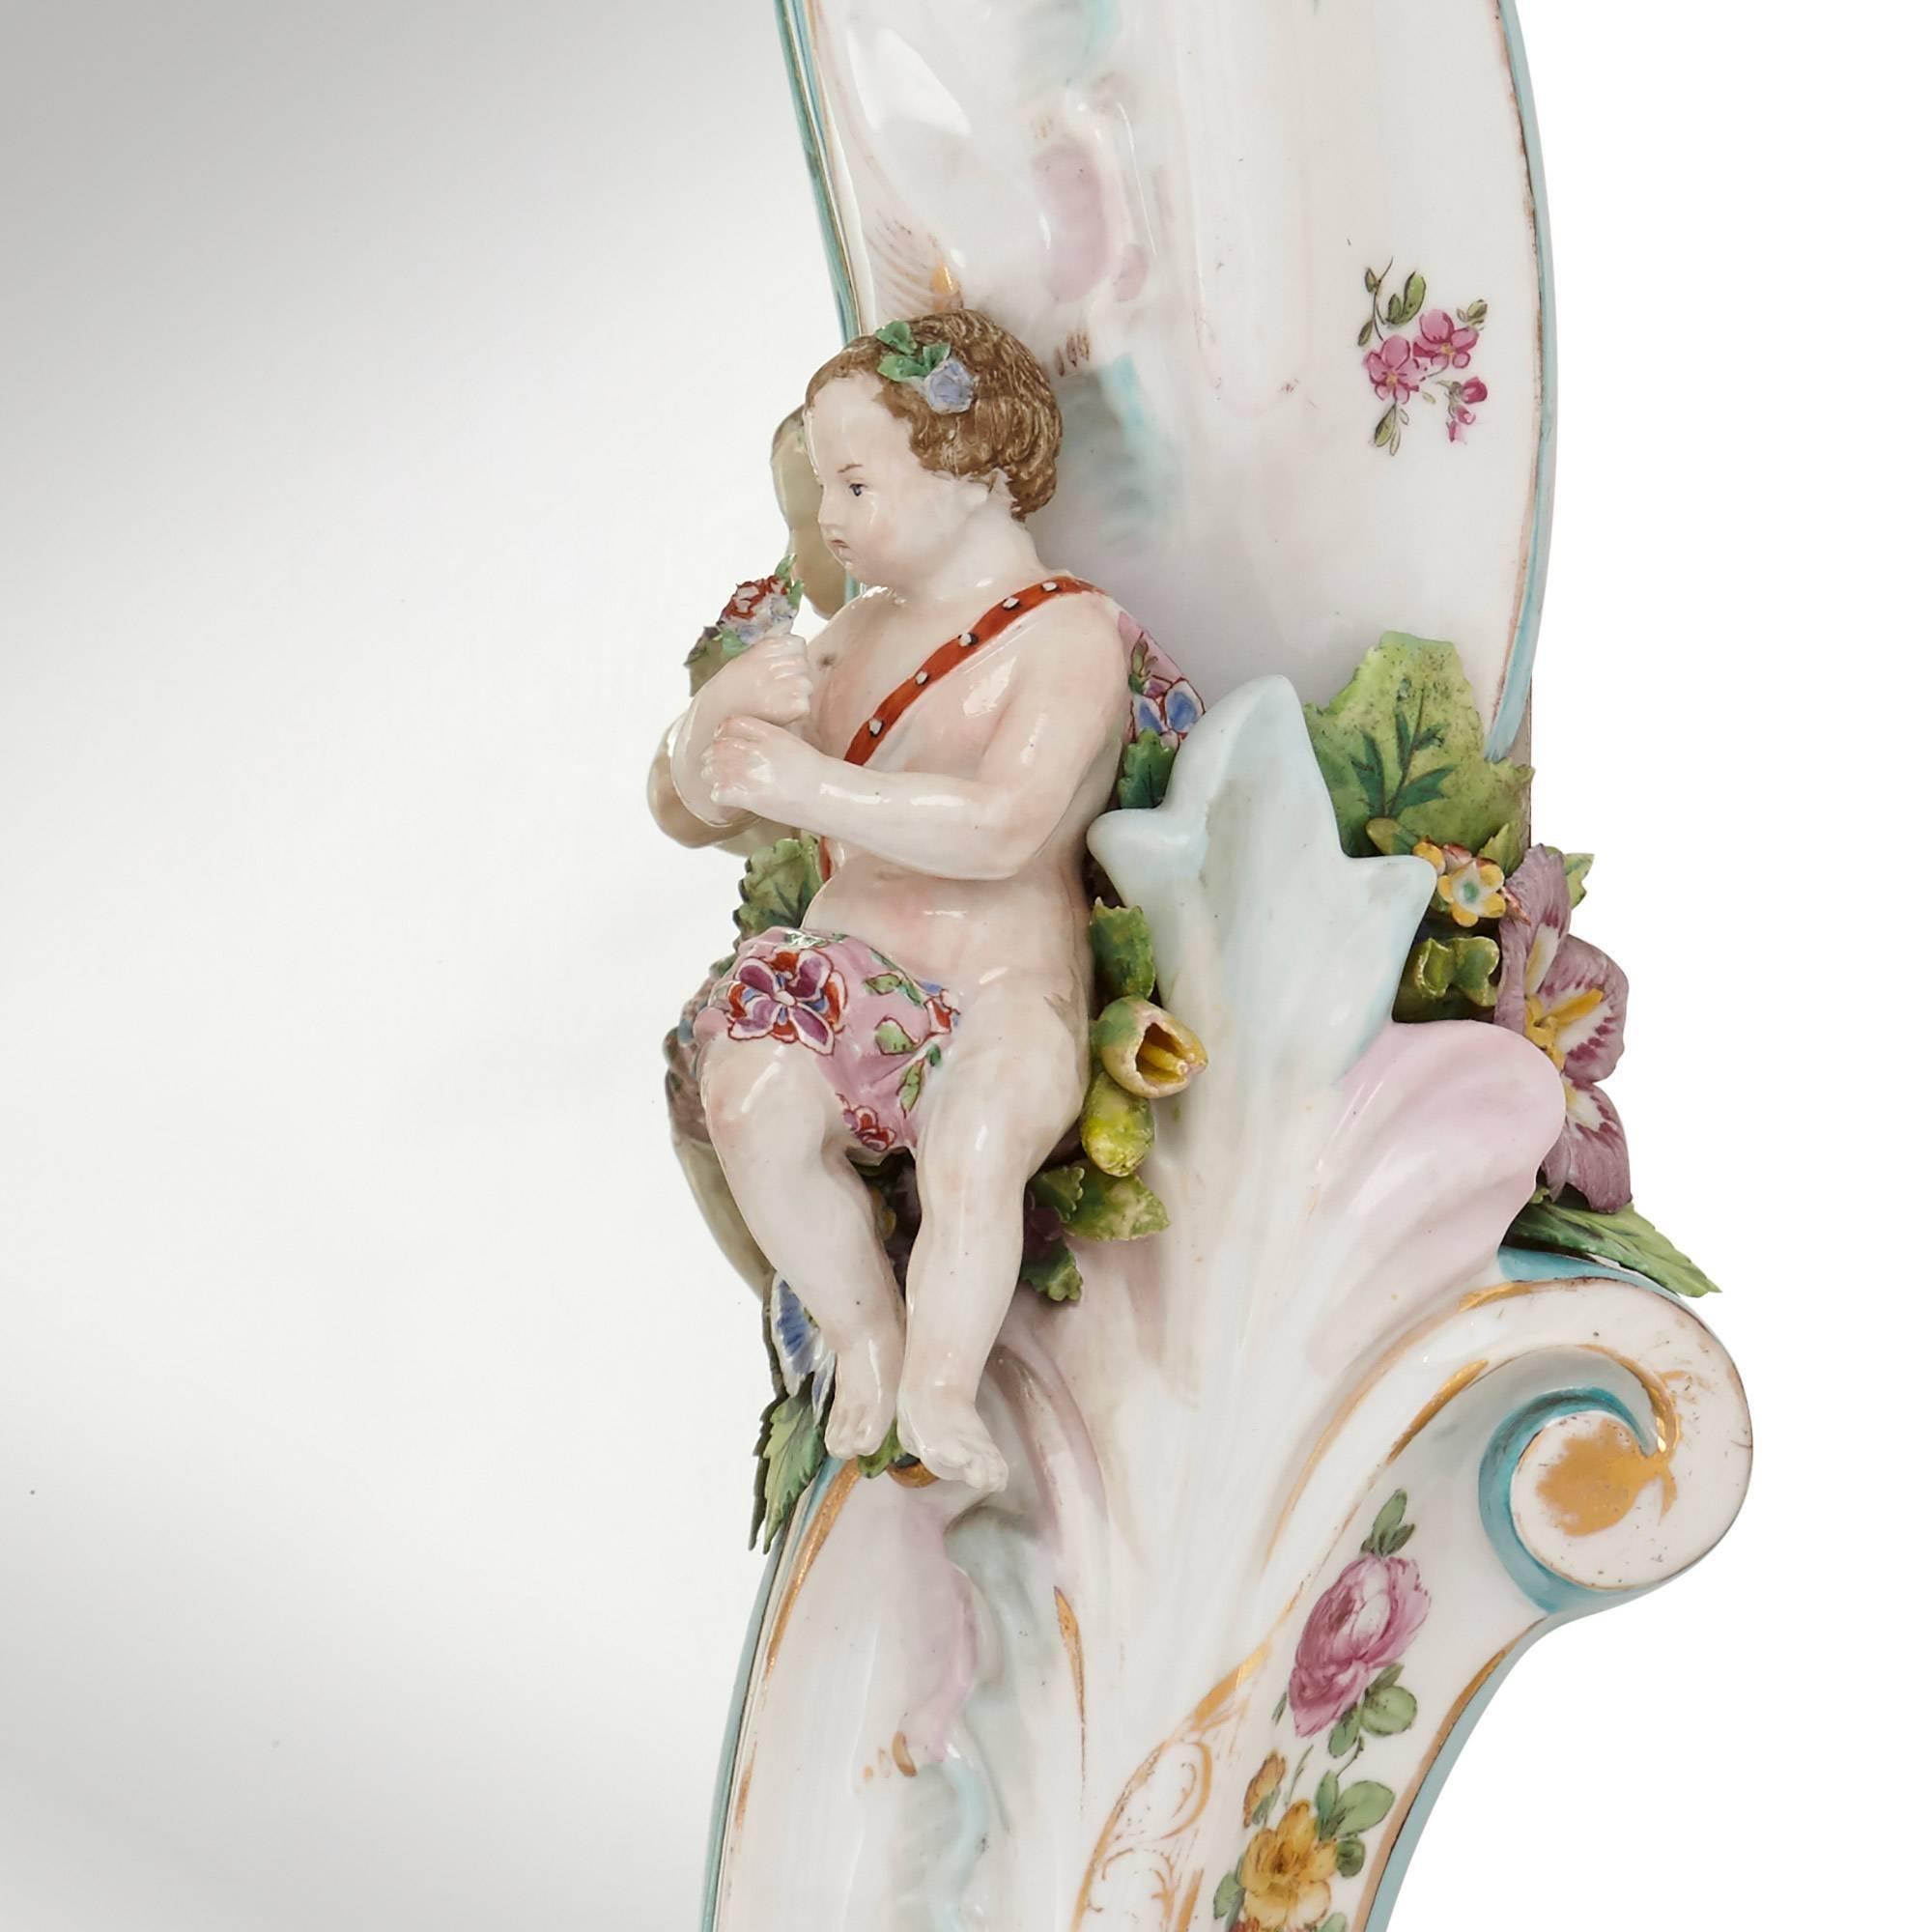 This antique mirror is decorated in the German Rococo style with beautiful painted flowers and scrolling foliage, and is mounted with porcelain figures of children. The mirror was manufactured in Dresden, Germany and dates from the late 19th century